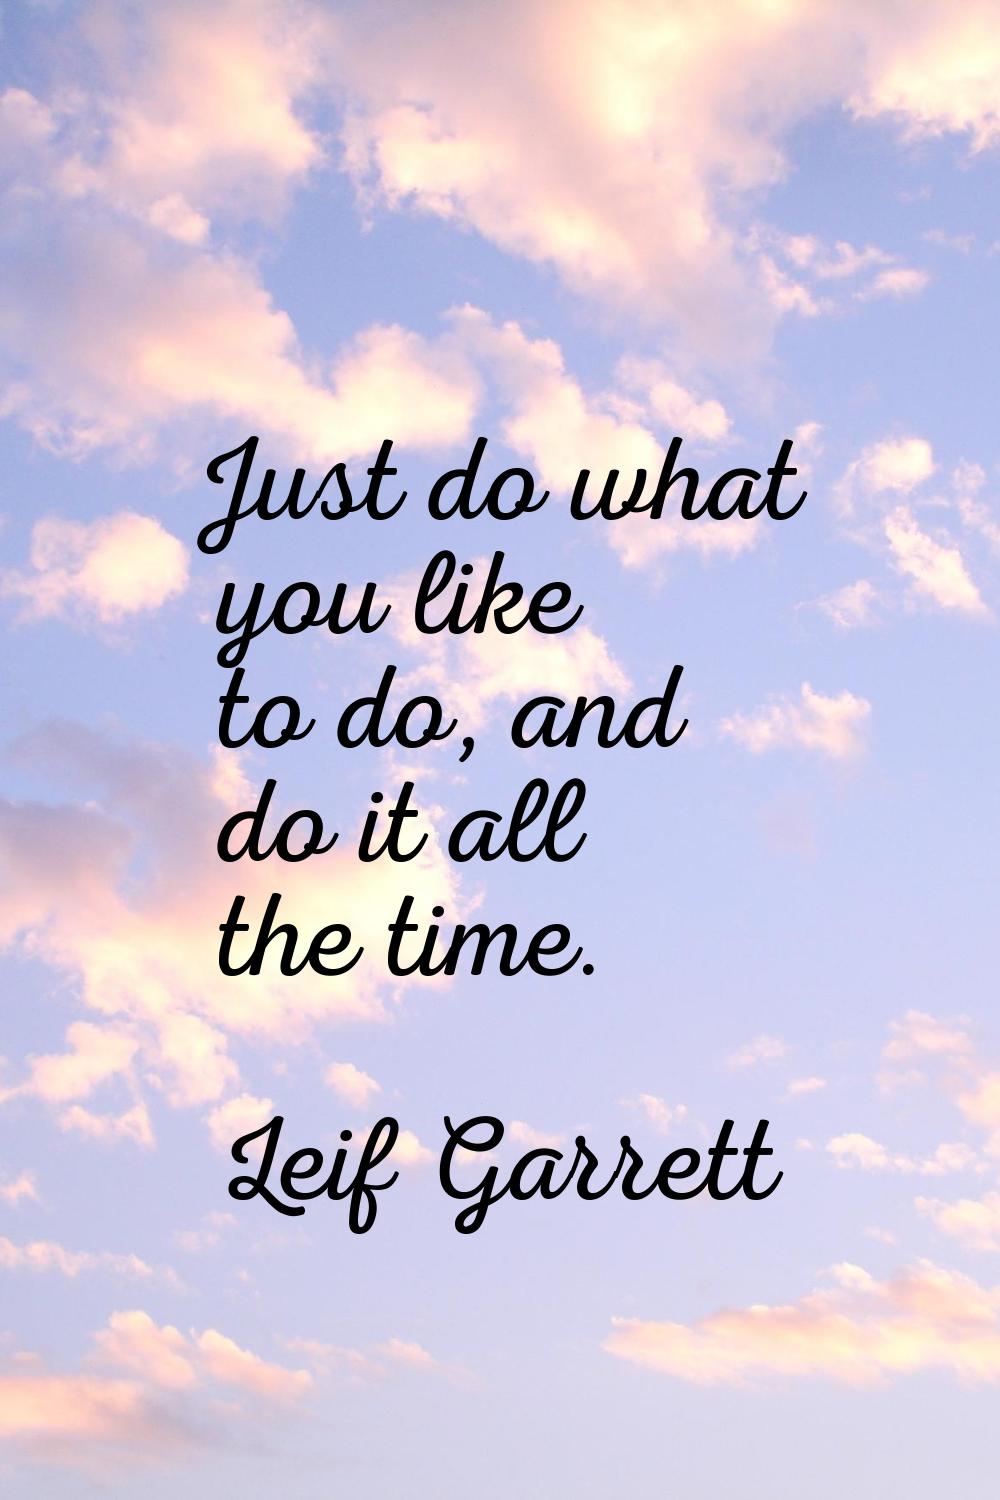 Just do what you like to do, and do it all the time.